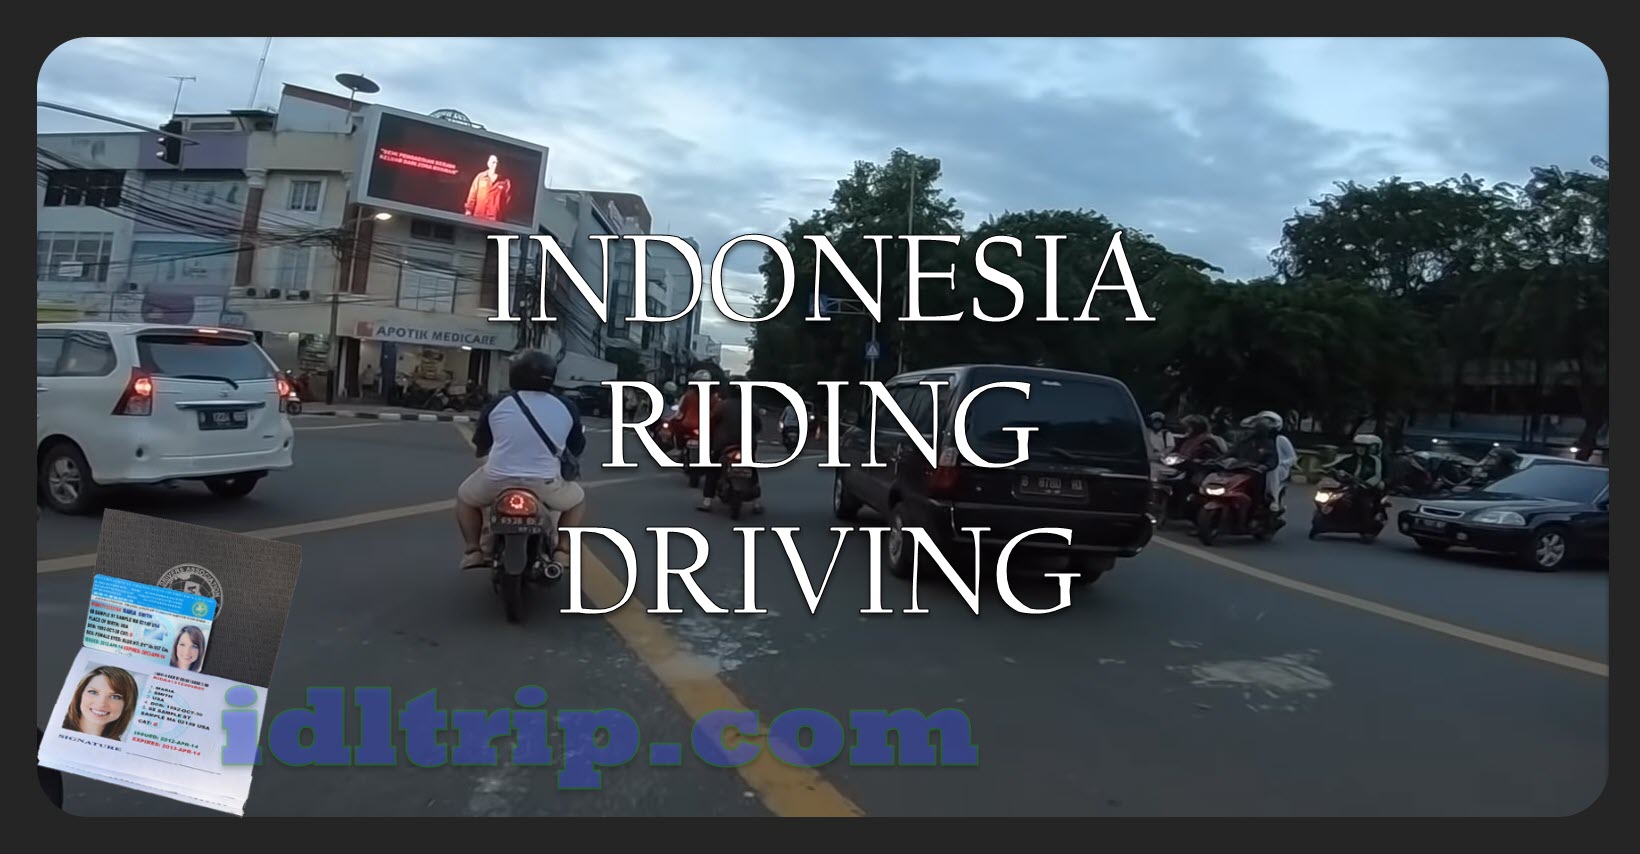 Indonisia riding and driving